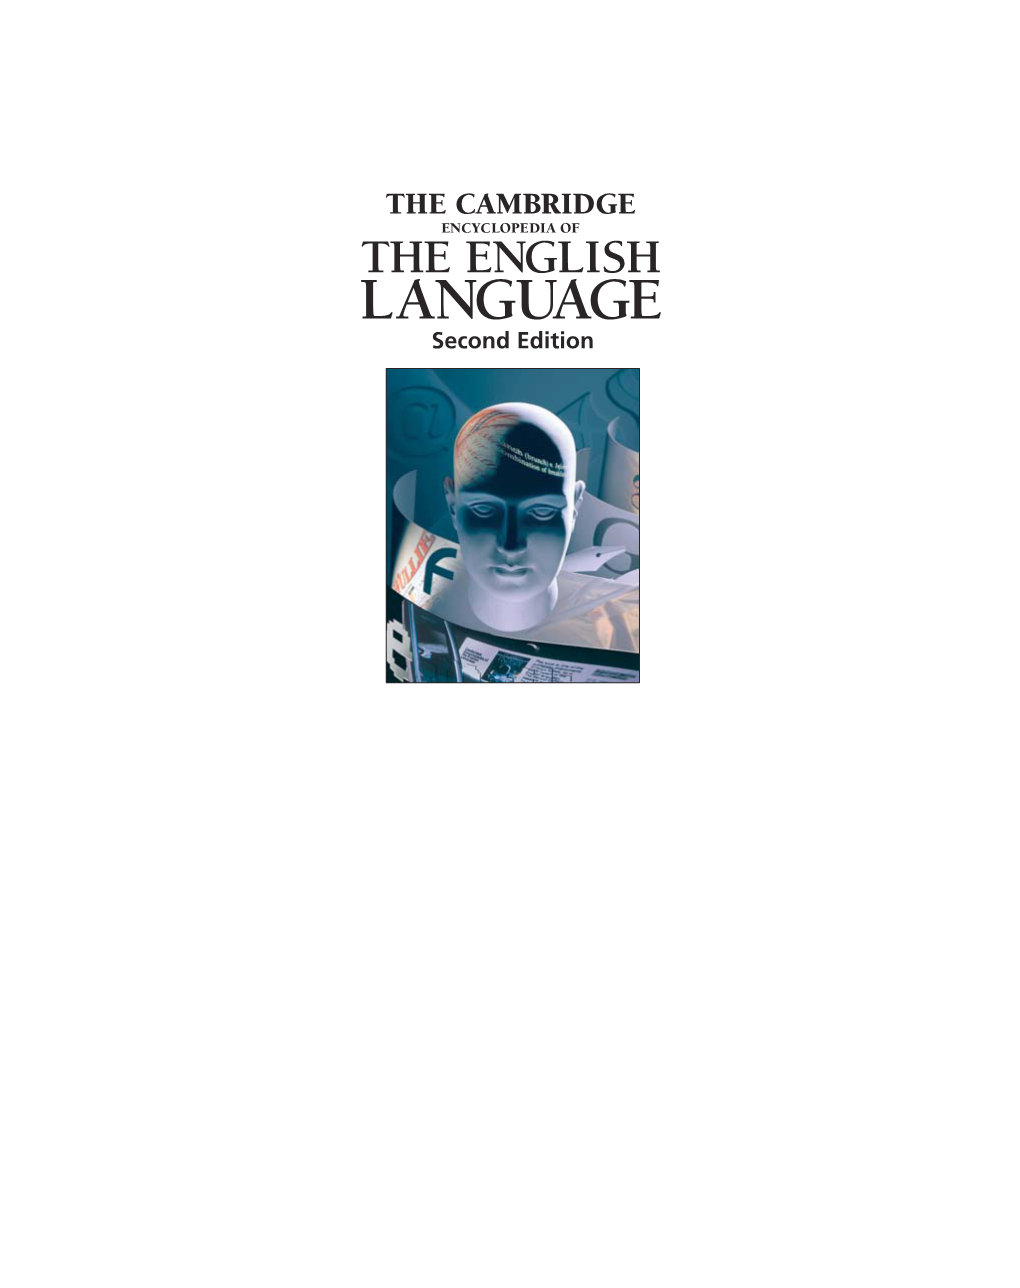 LANGUAGE Second Edition PUBLISHED by the PRESS SYNDICATE of the UNIVERSITY of CAMBRIDGE the Pitt Building, Trumpington Street, Cambridge CB2 1RP, United Kingdom